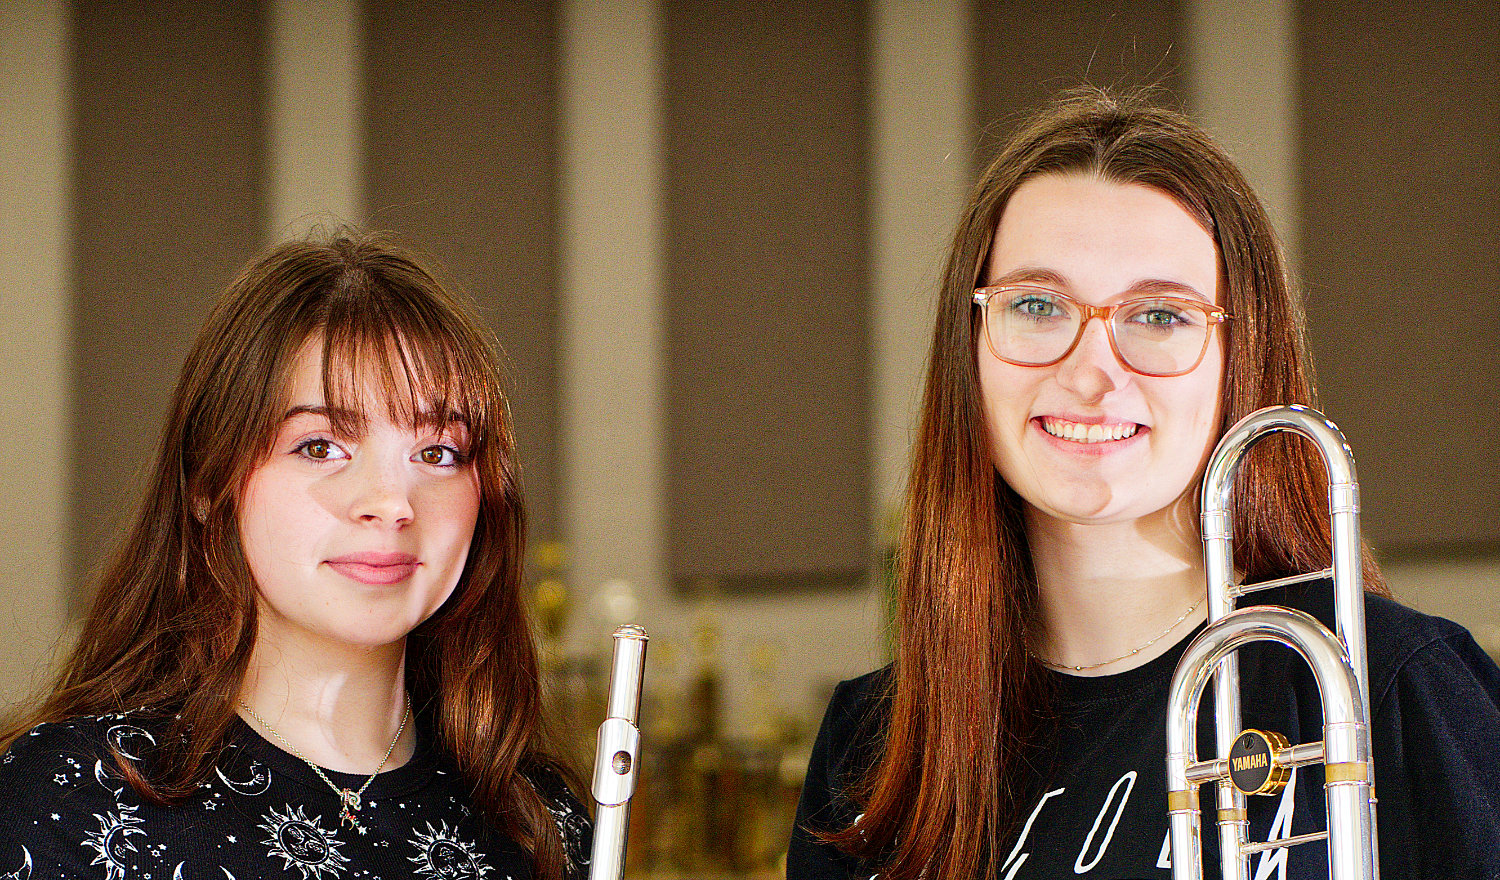 Emily Miller, left, and Gabby Wolf will head to San Antonio Feb. 9 to participate in the all-state band clinic where they will audition for chairs then rehearse for a concert Feb. 12 at the Lila Cockrell Theatre.